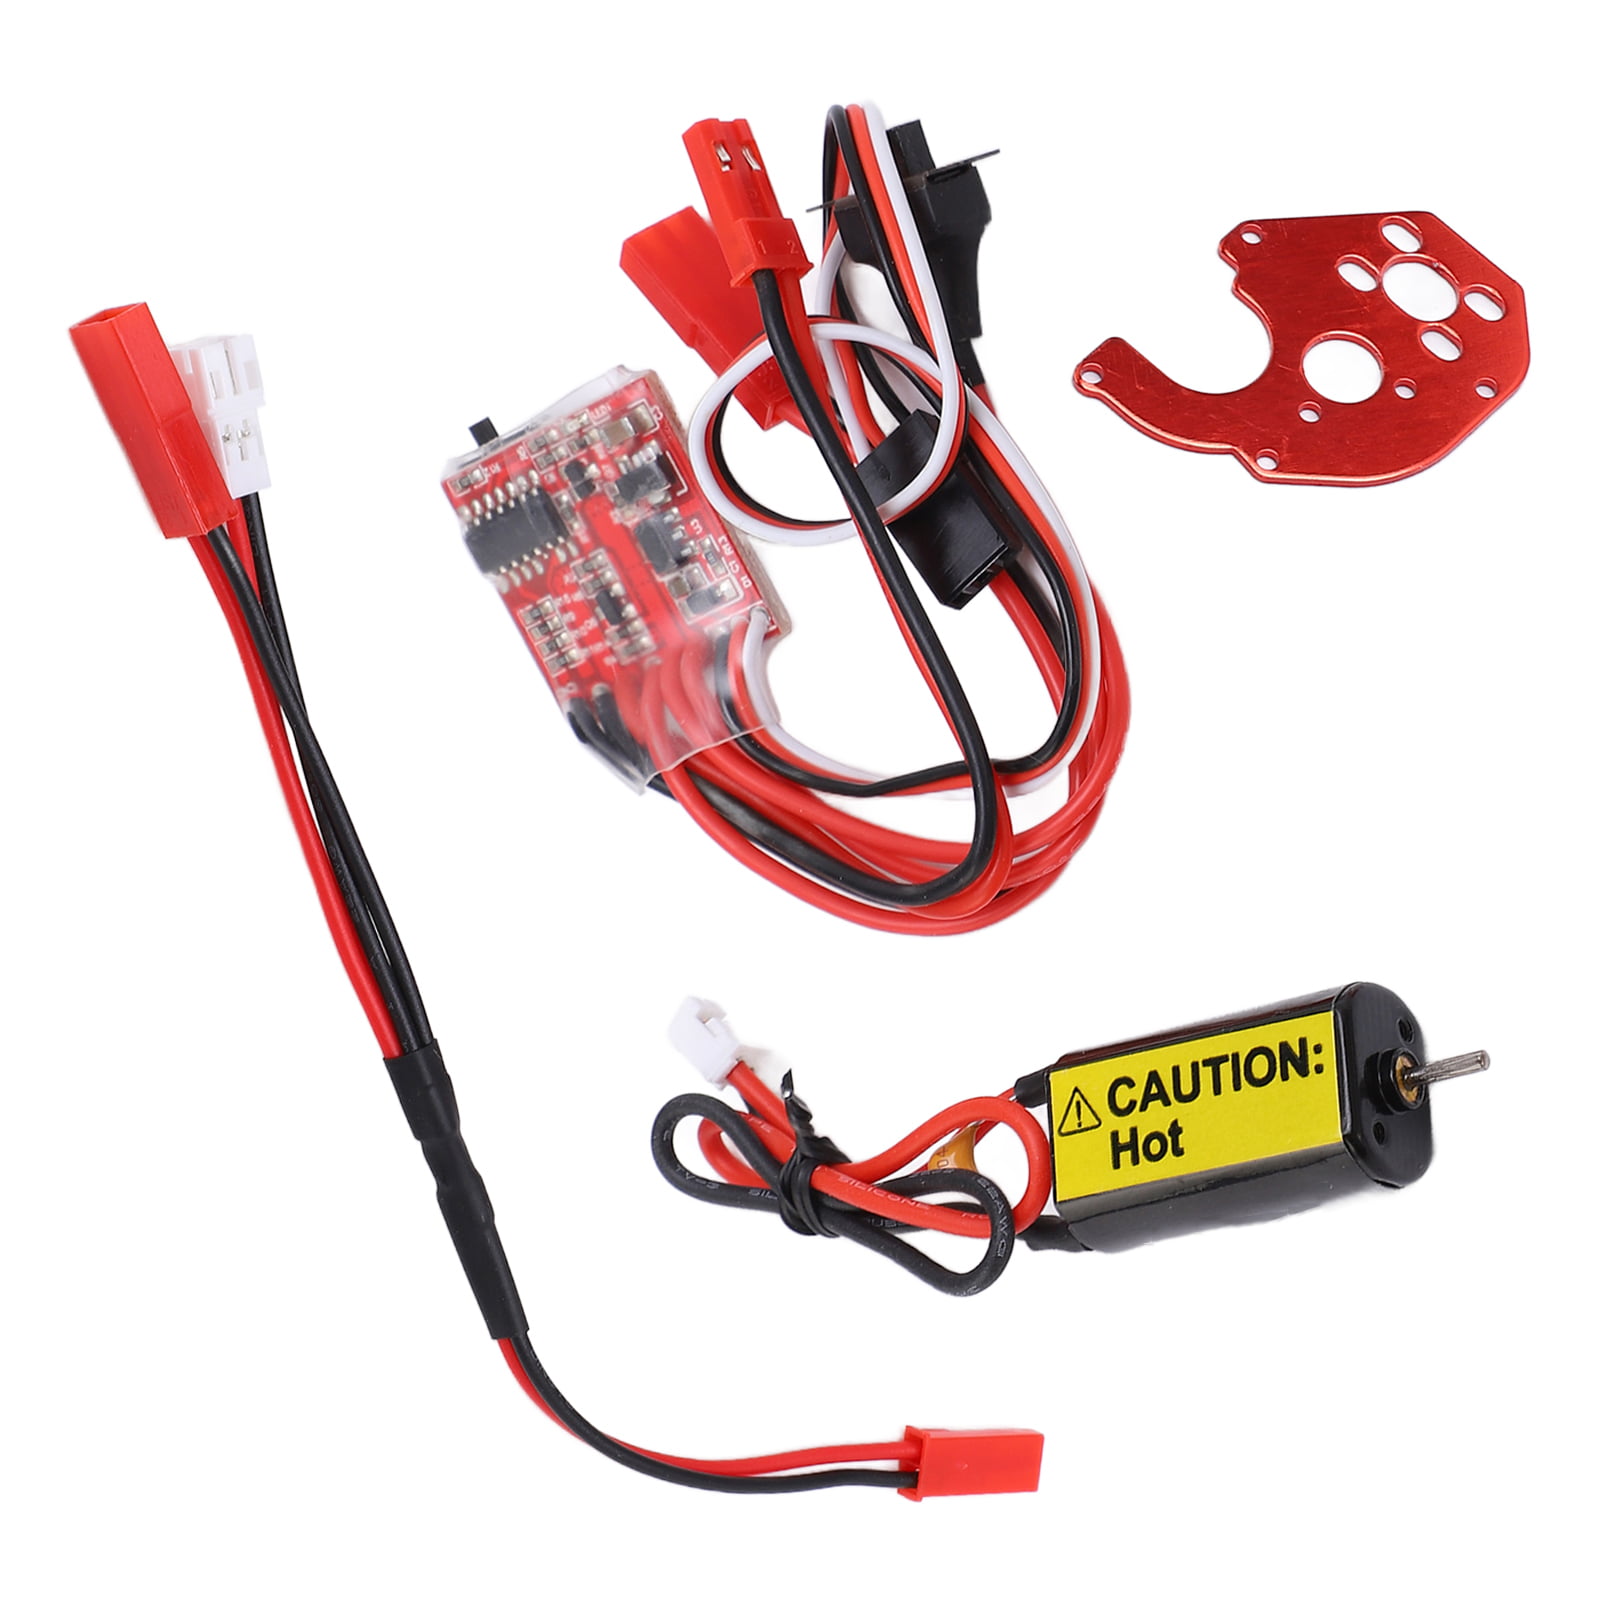 050 66T RC Car Brushed Motor with 30A ESC RC Car Upgrade Accessory for Axial SCX24 AXI90081 1/24 RC Car 